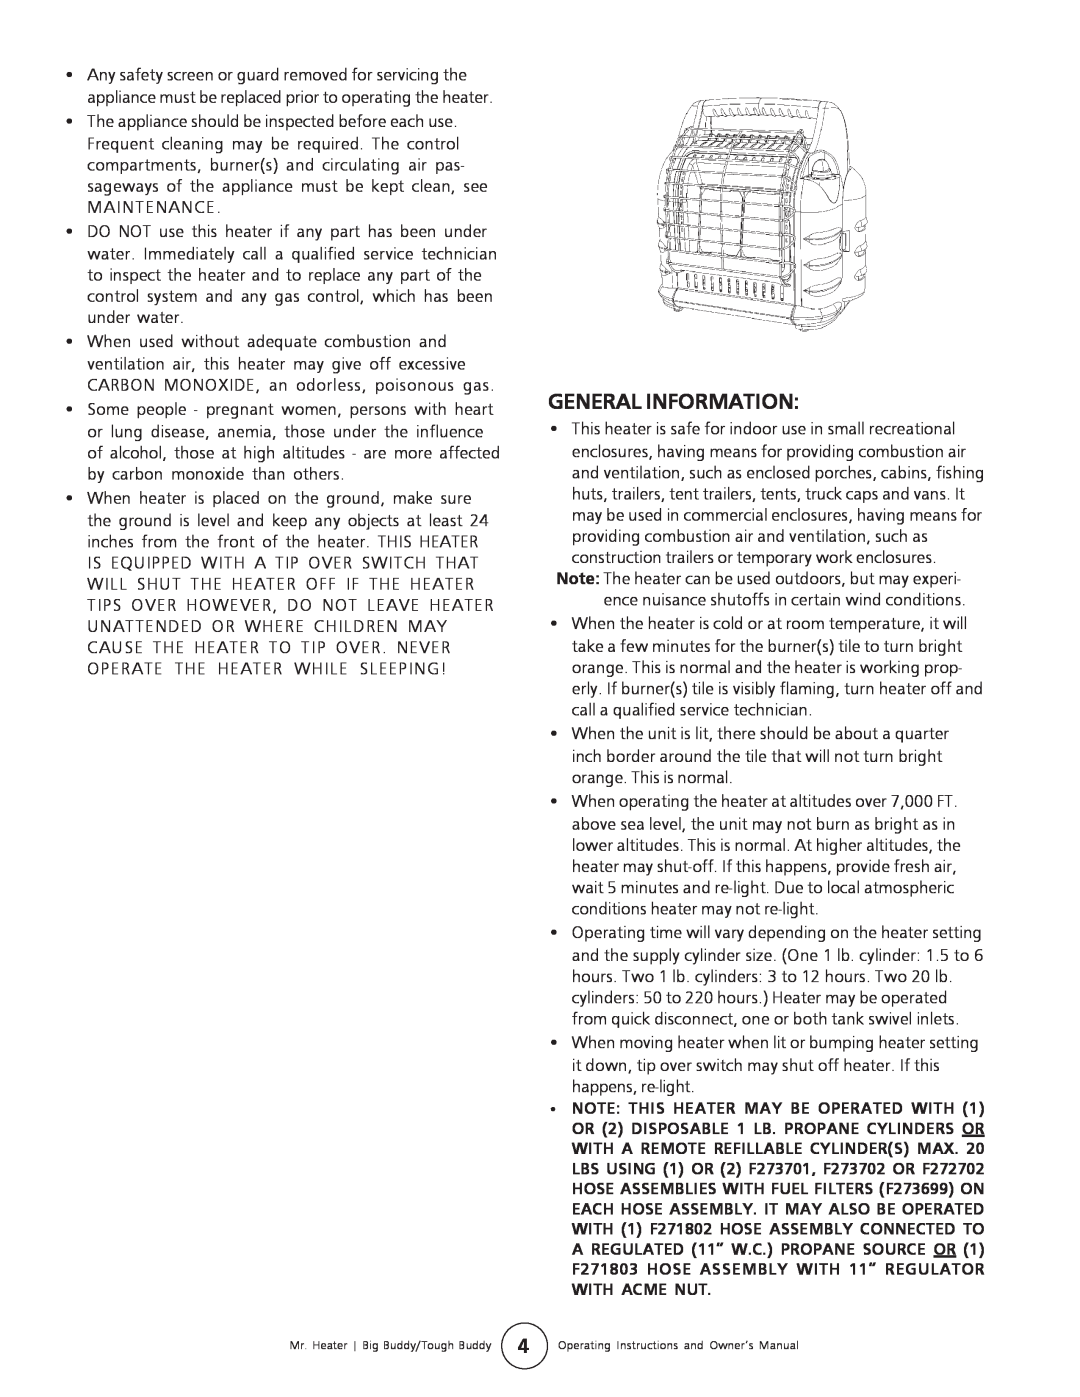 Enerco MH18B operating instructions General Information 